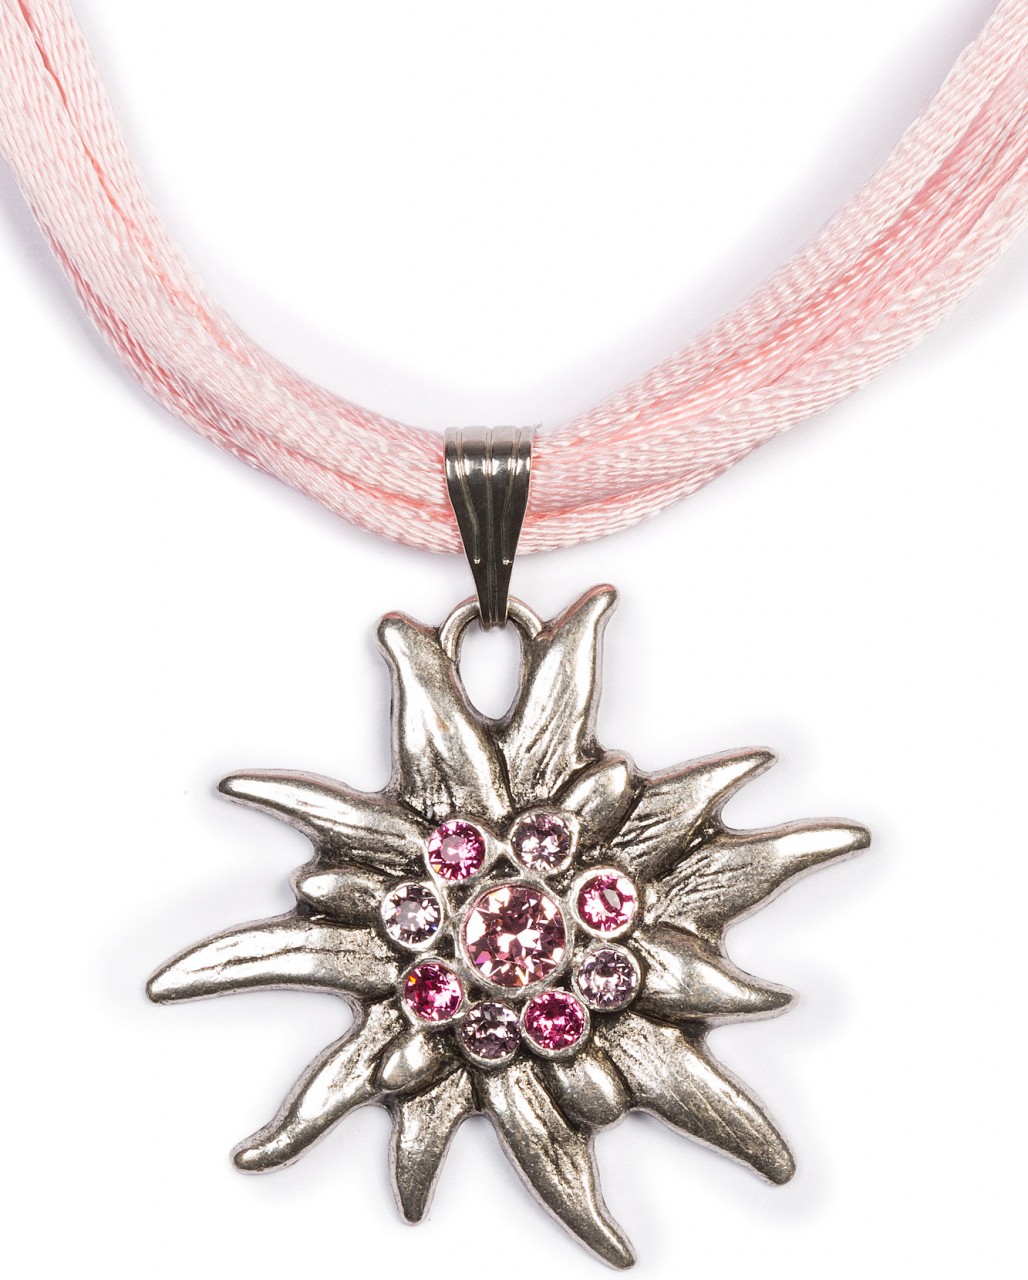 Collier edelweiss avec 4 bandes rose clair